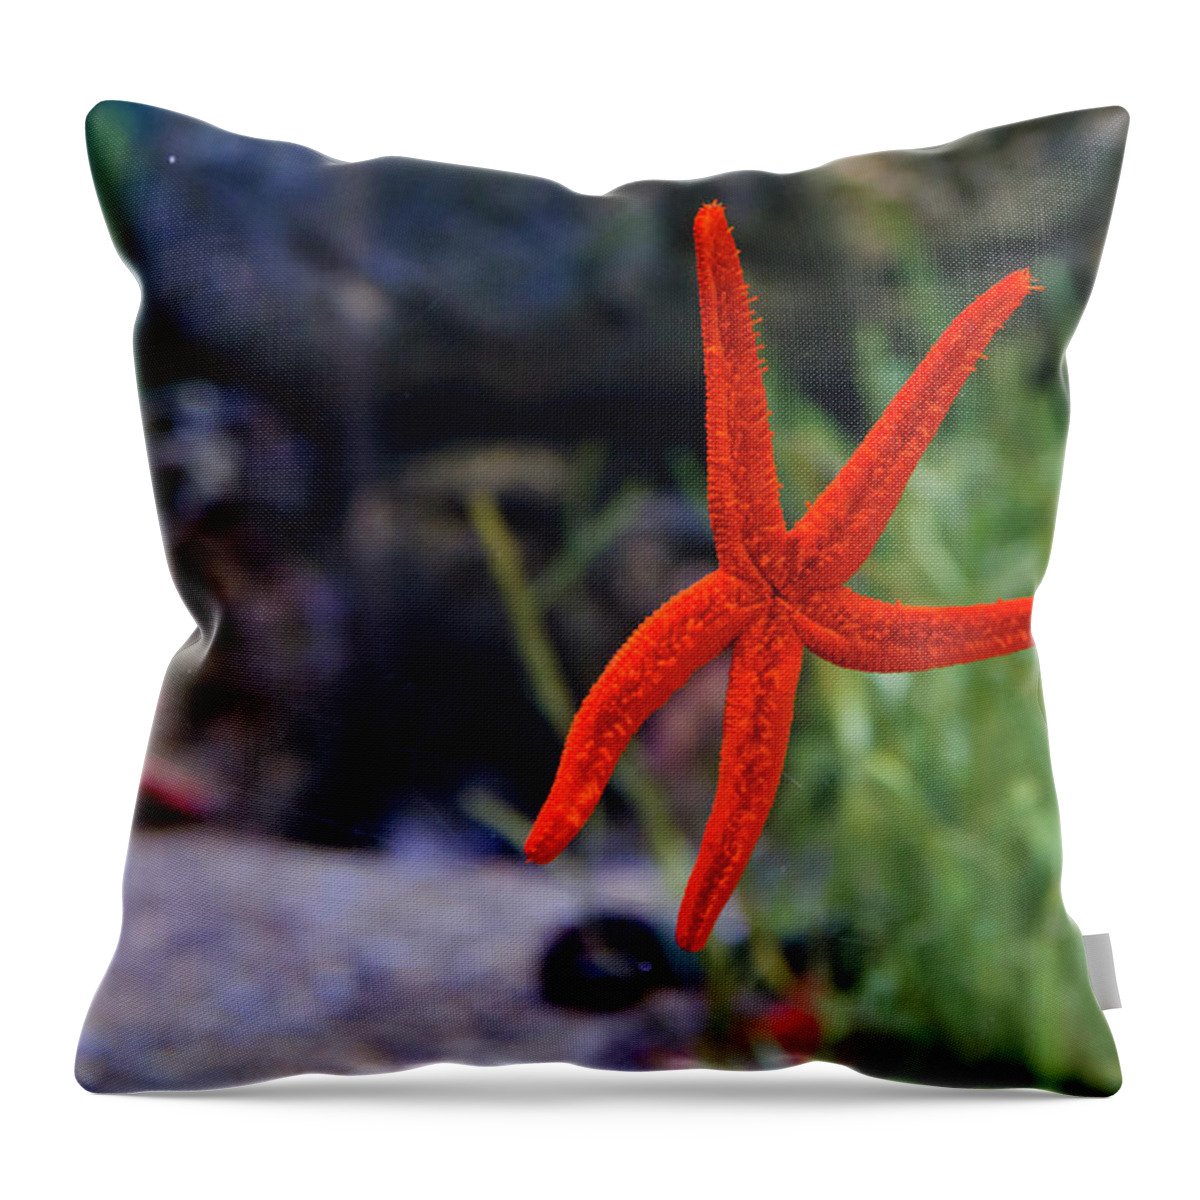 Underwater Throw Pillow featuring the photograph Starfish by Albano Photography